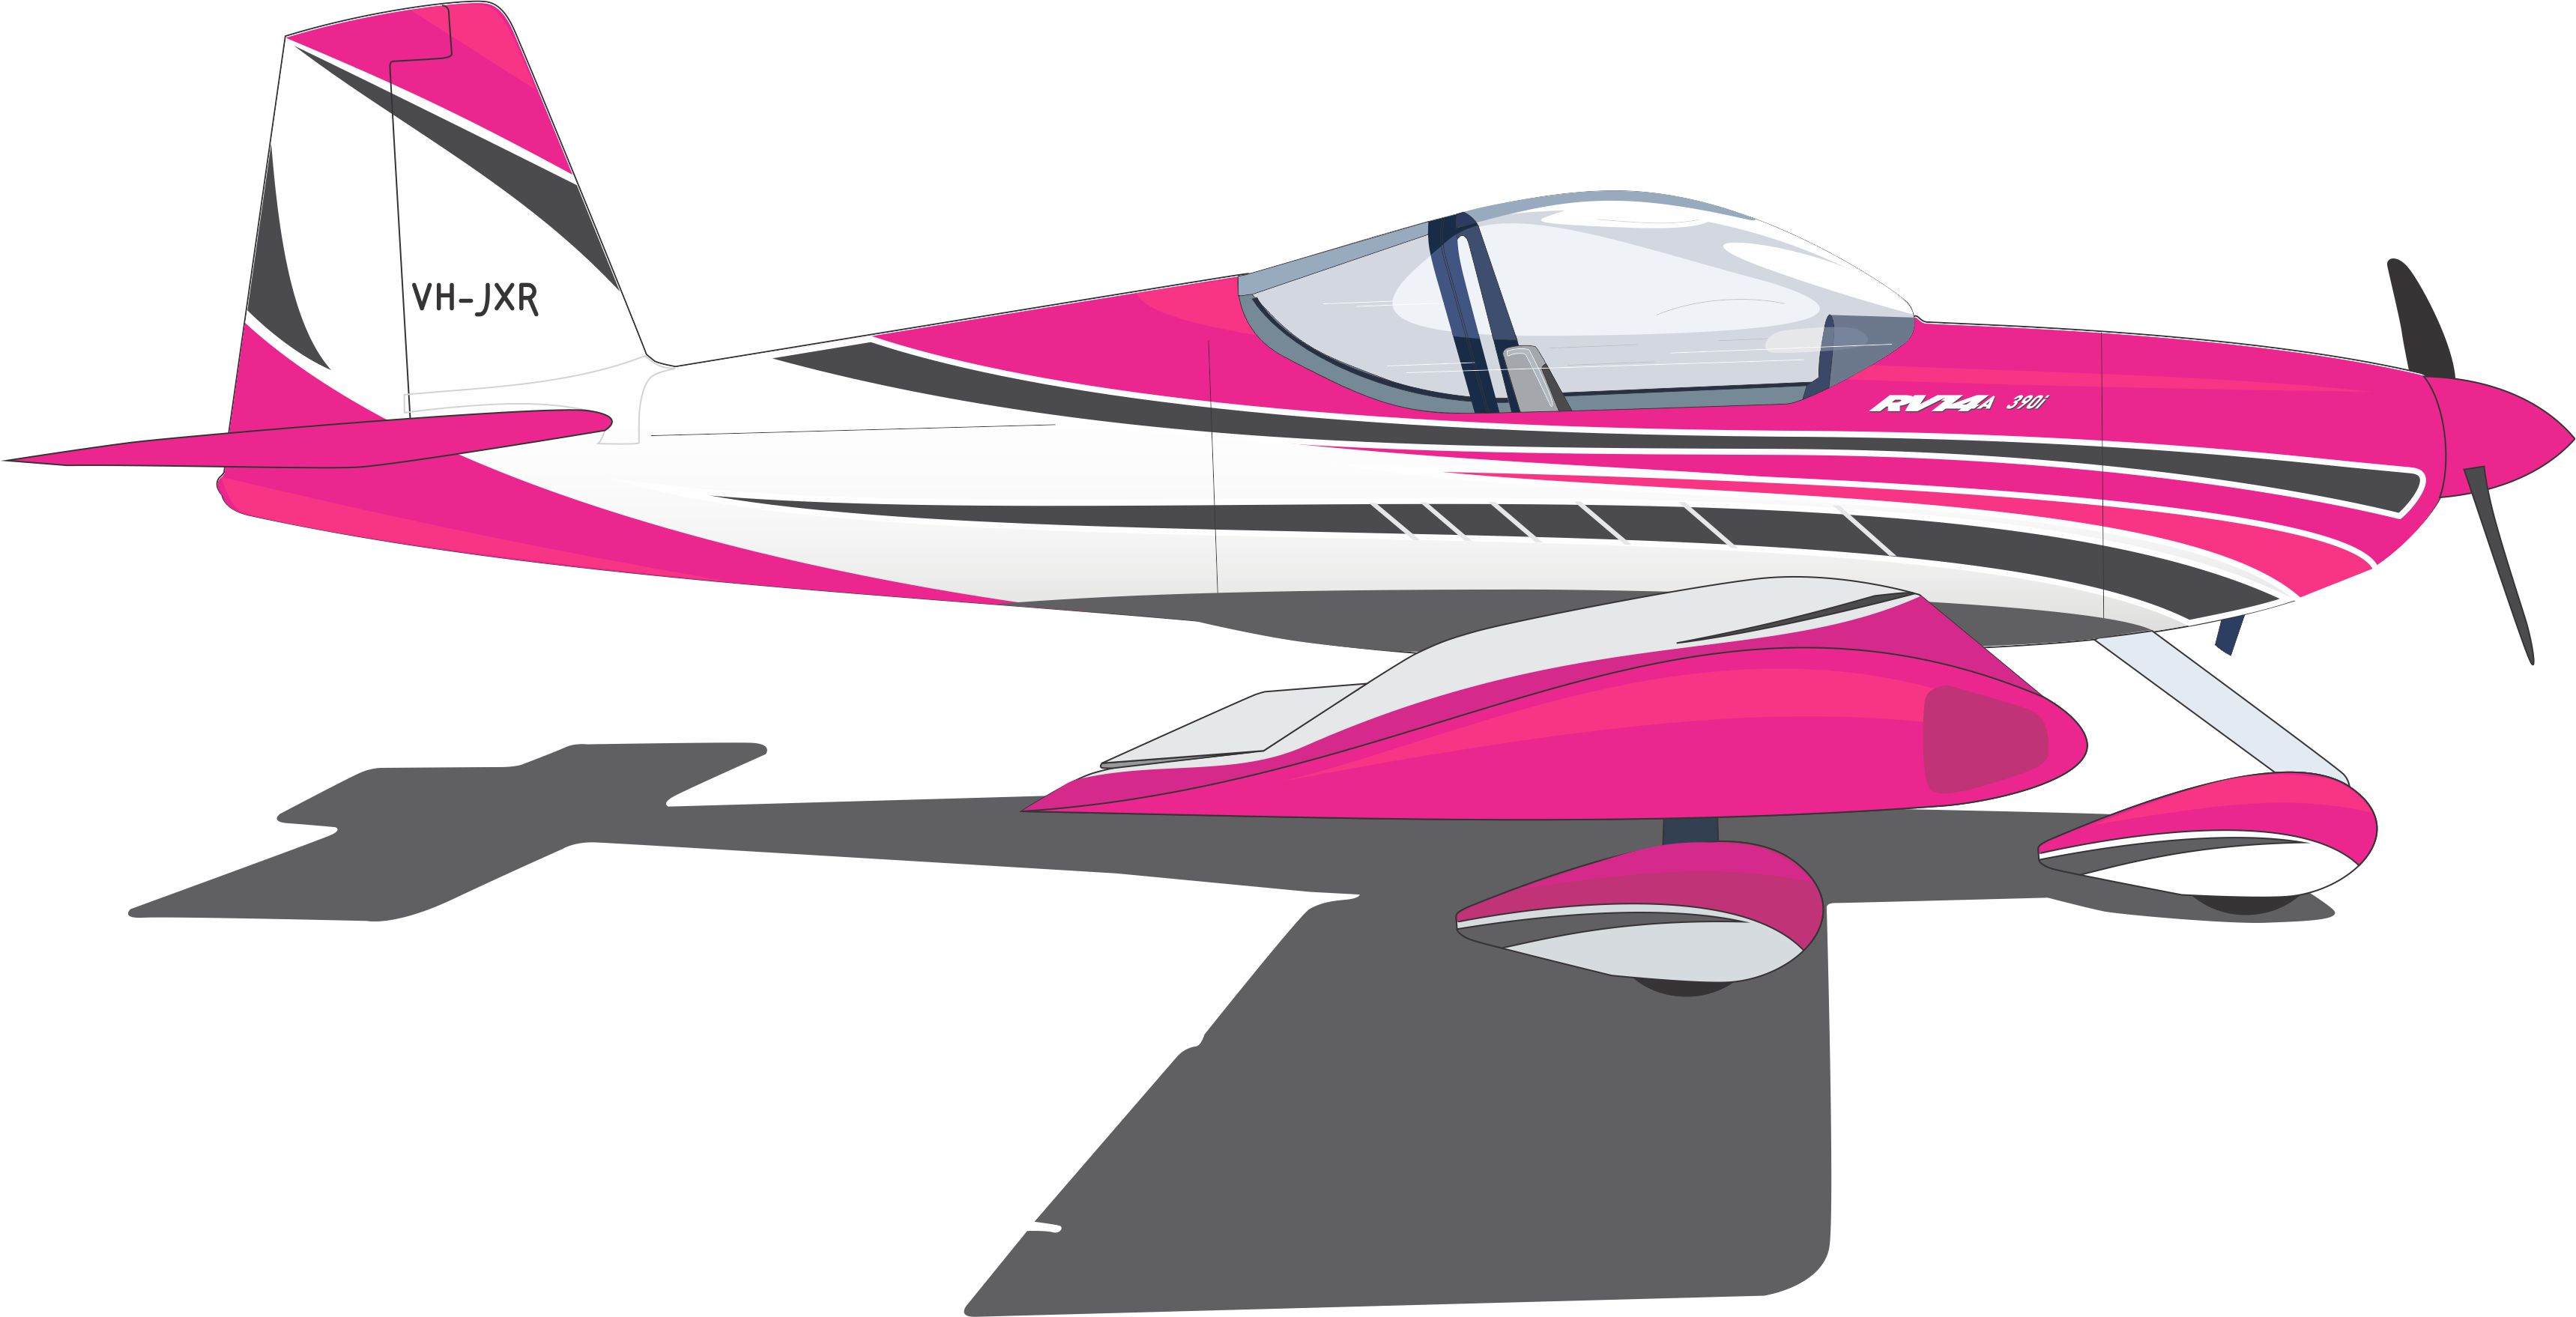 RV14A Side View Vector of color scheme for VHJXR Graphics